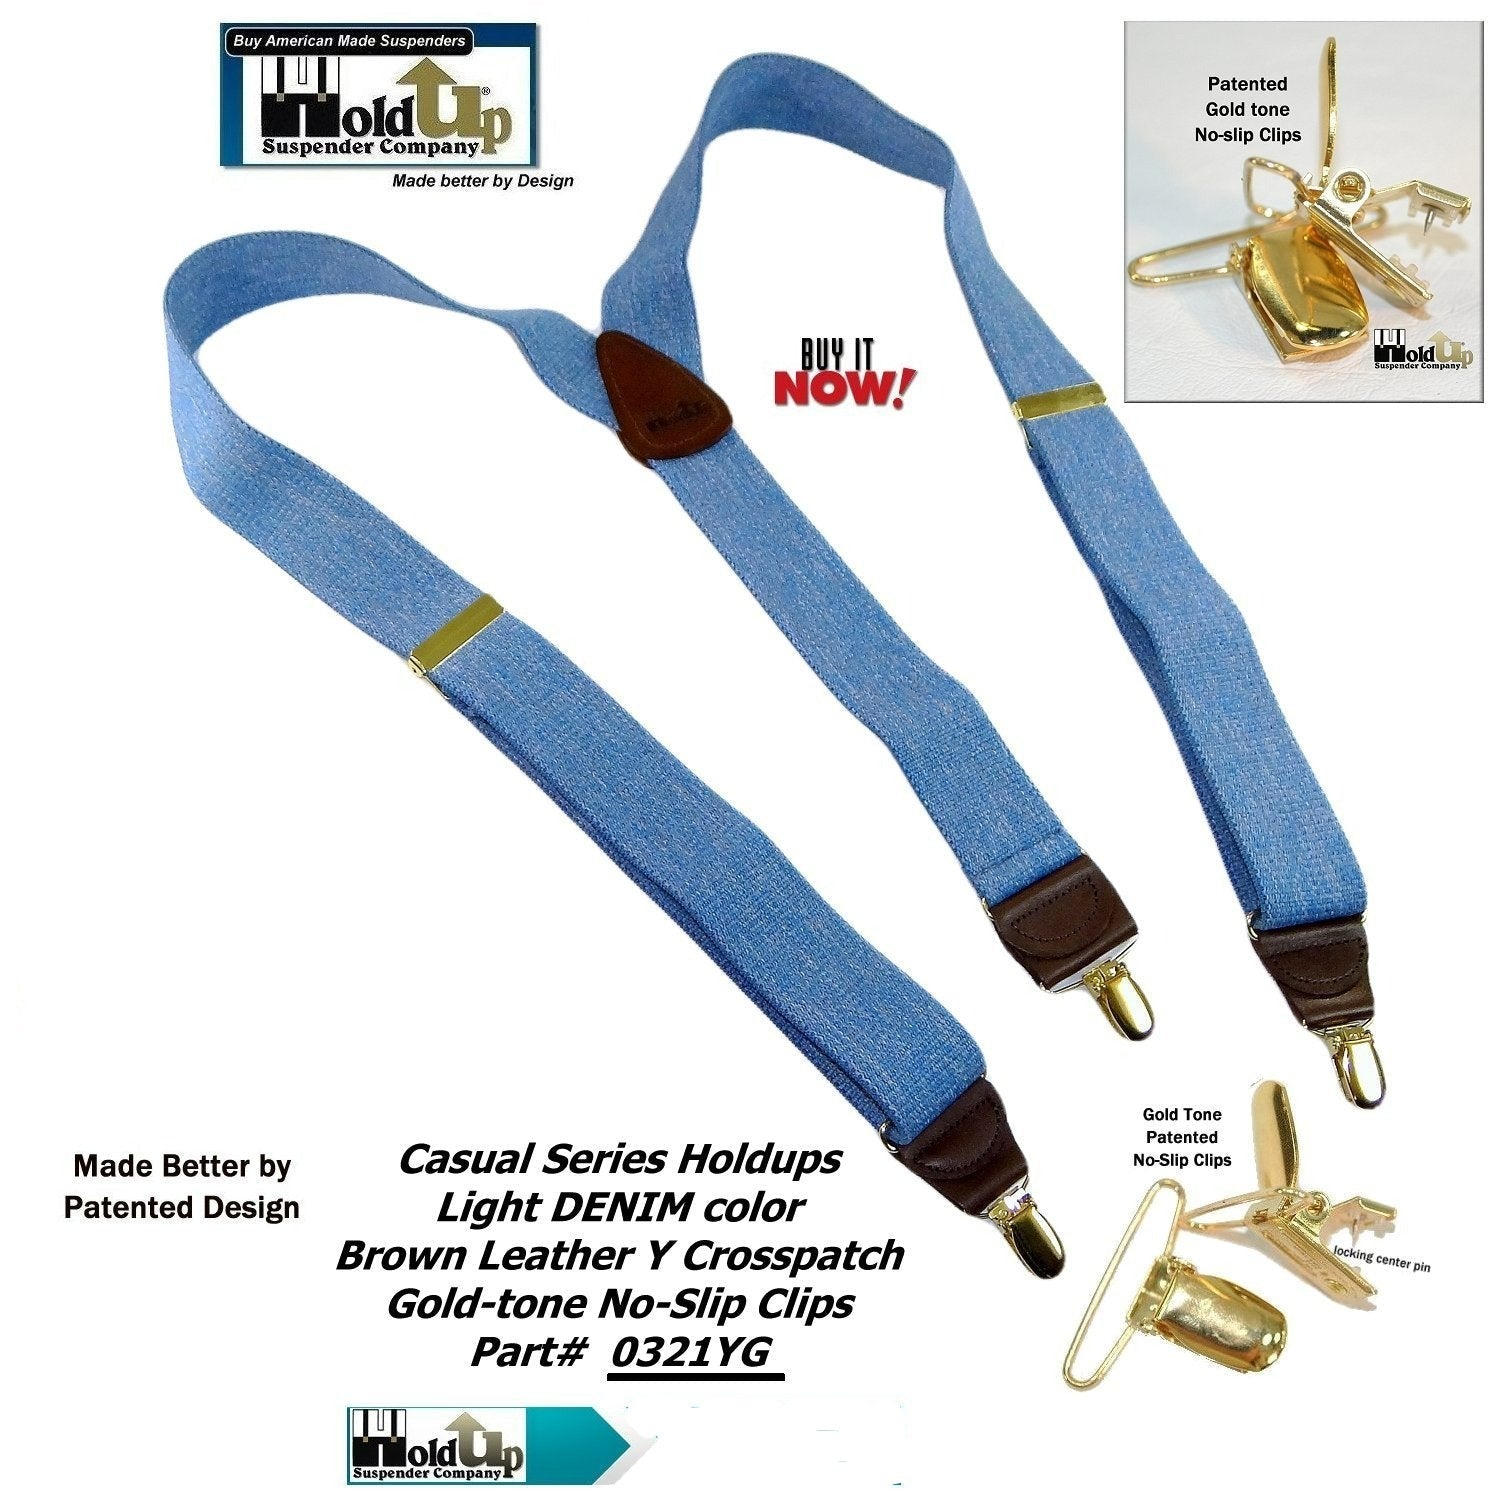 Holdup Brand USA made Double-Ups Style Men's Suspenders in a light Blue  Denim Color and Y-Back crosspatch